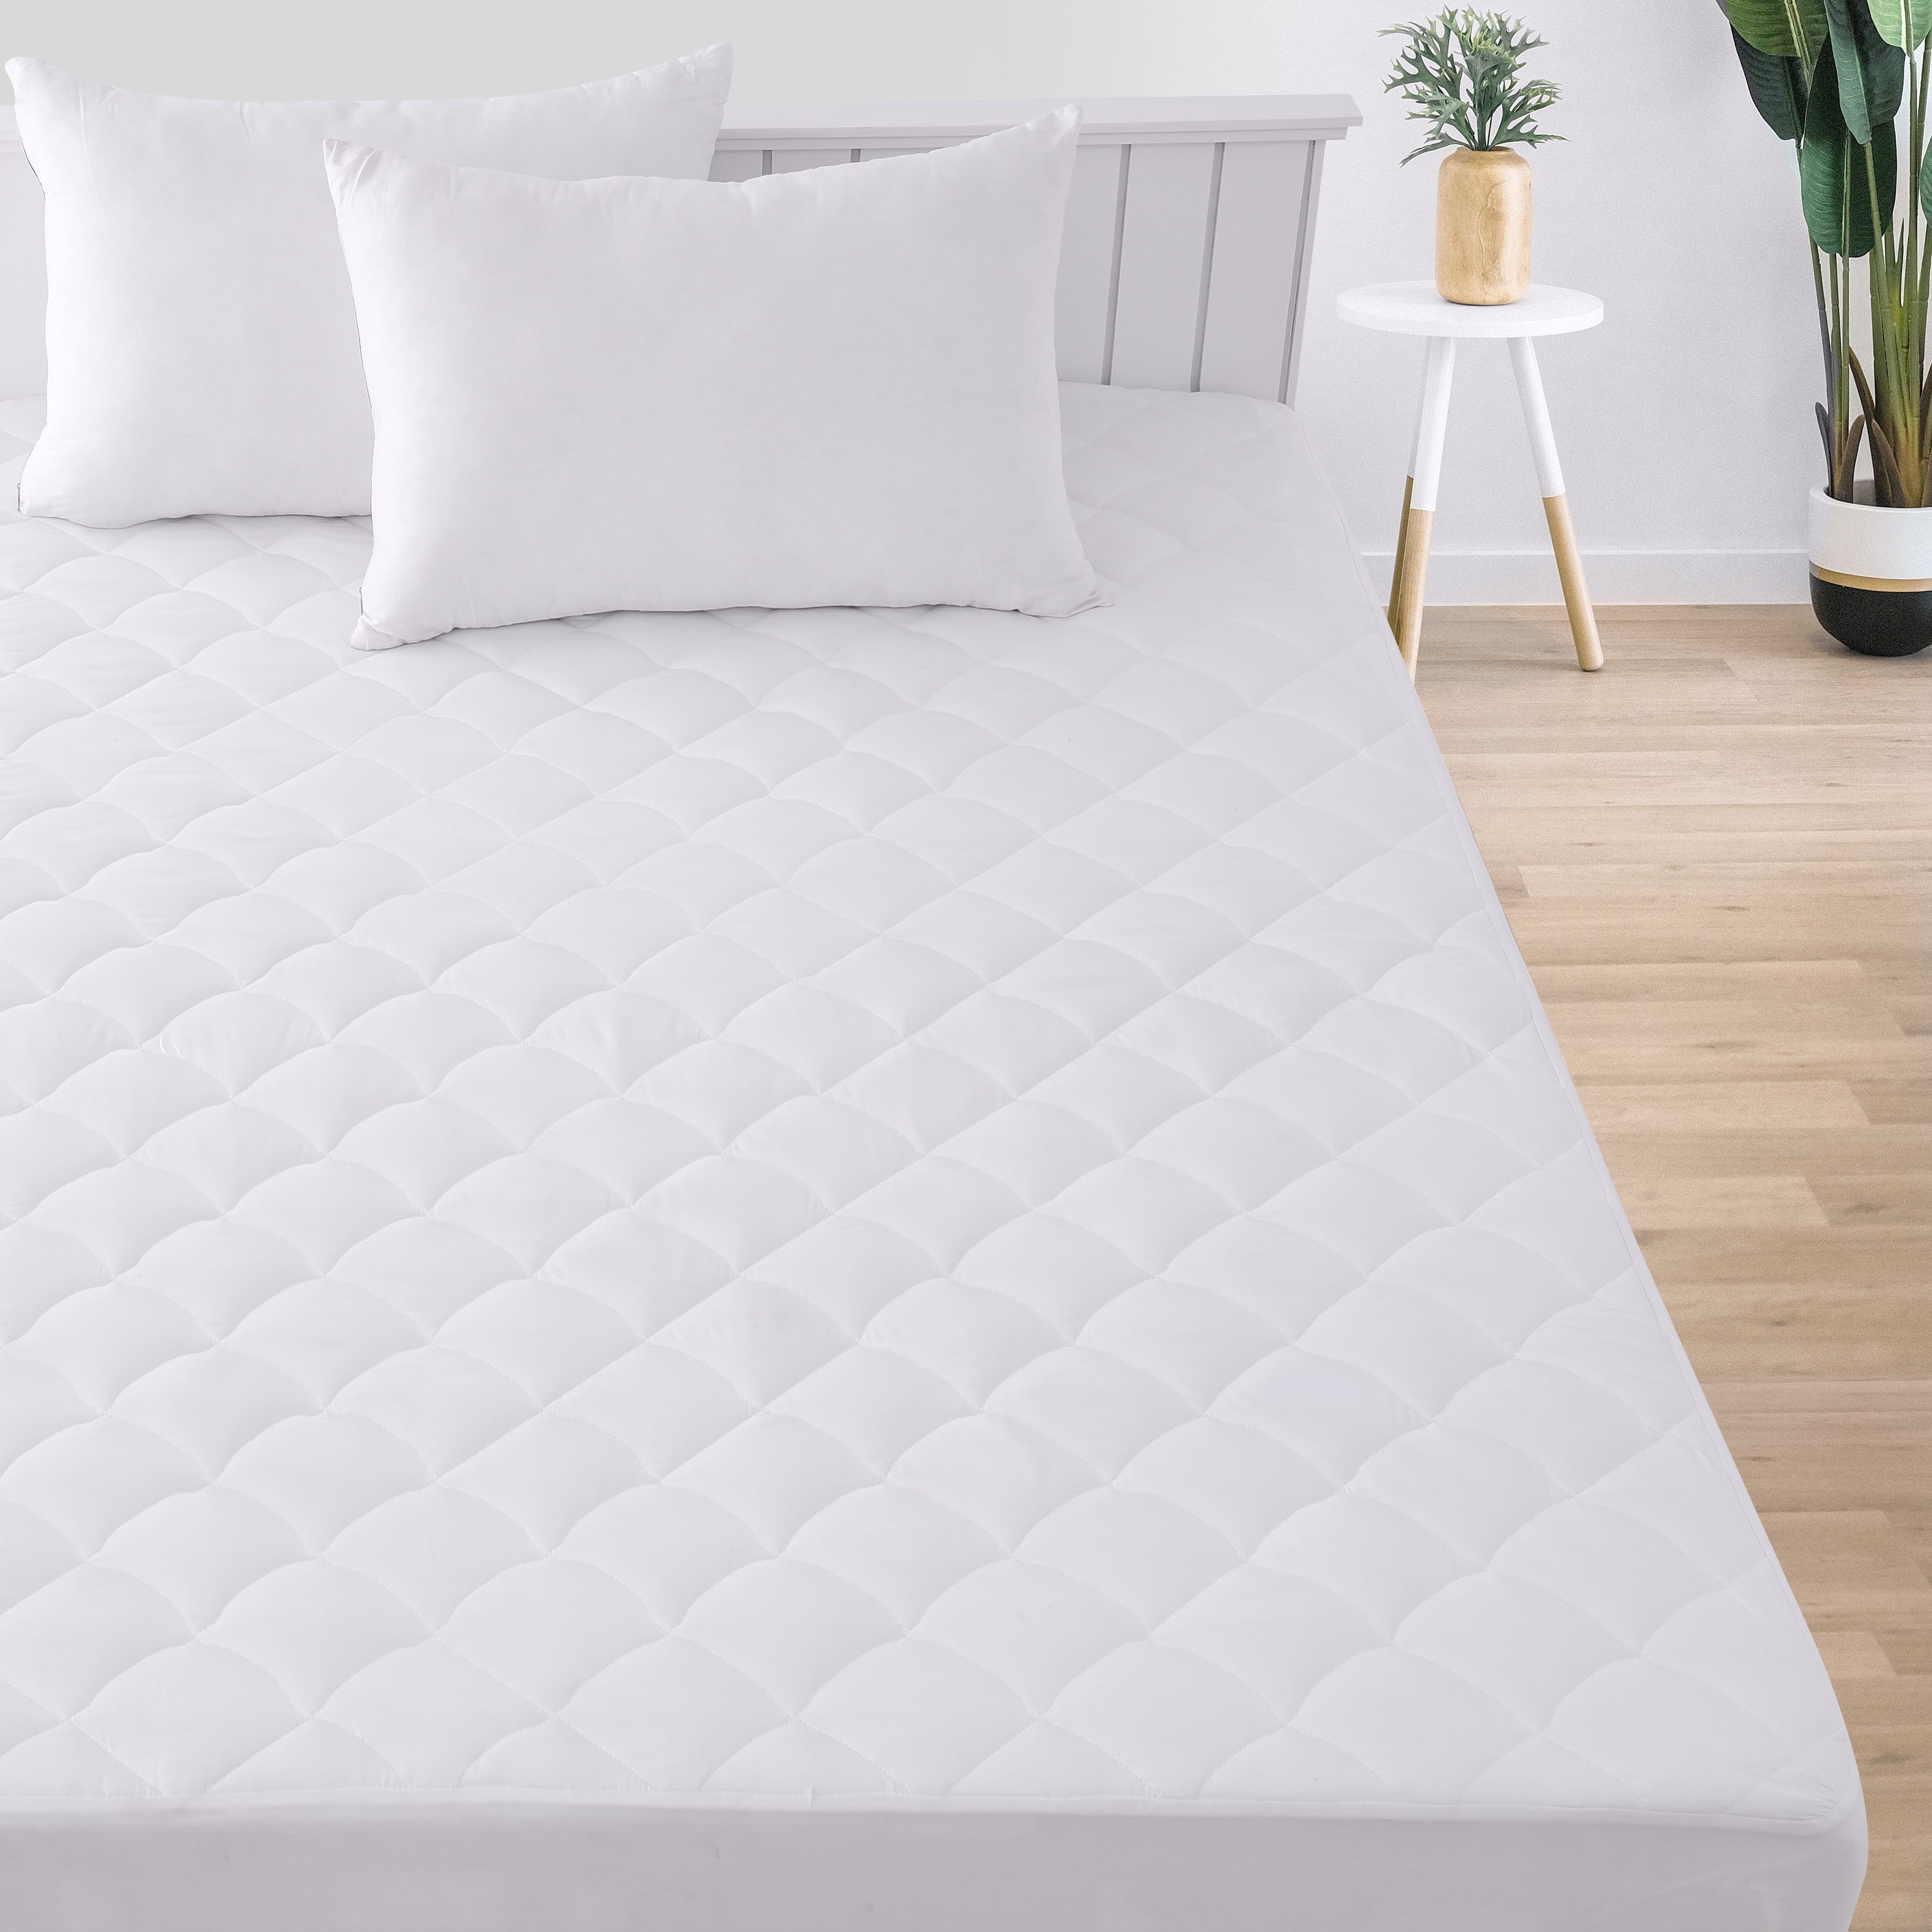 Twin XL Mattress Pad Cover Protector Size 39x80 inches Stretches to 16 Deep  - Quilted Fitted Sheet for Twin Extra Long Bed White